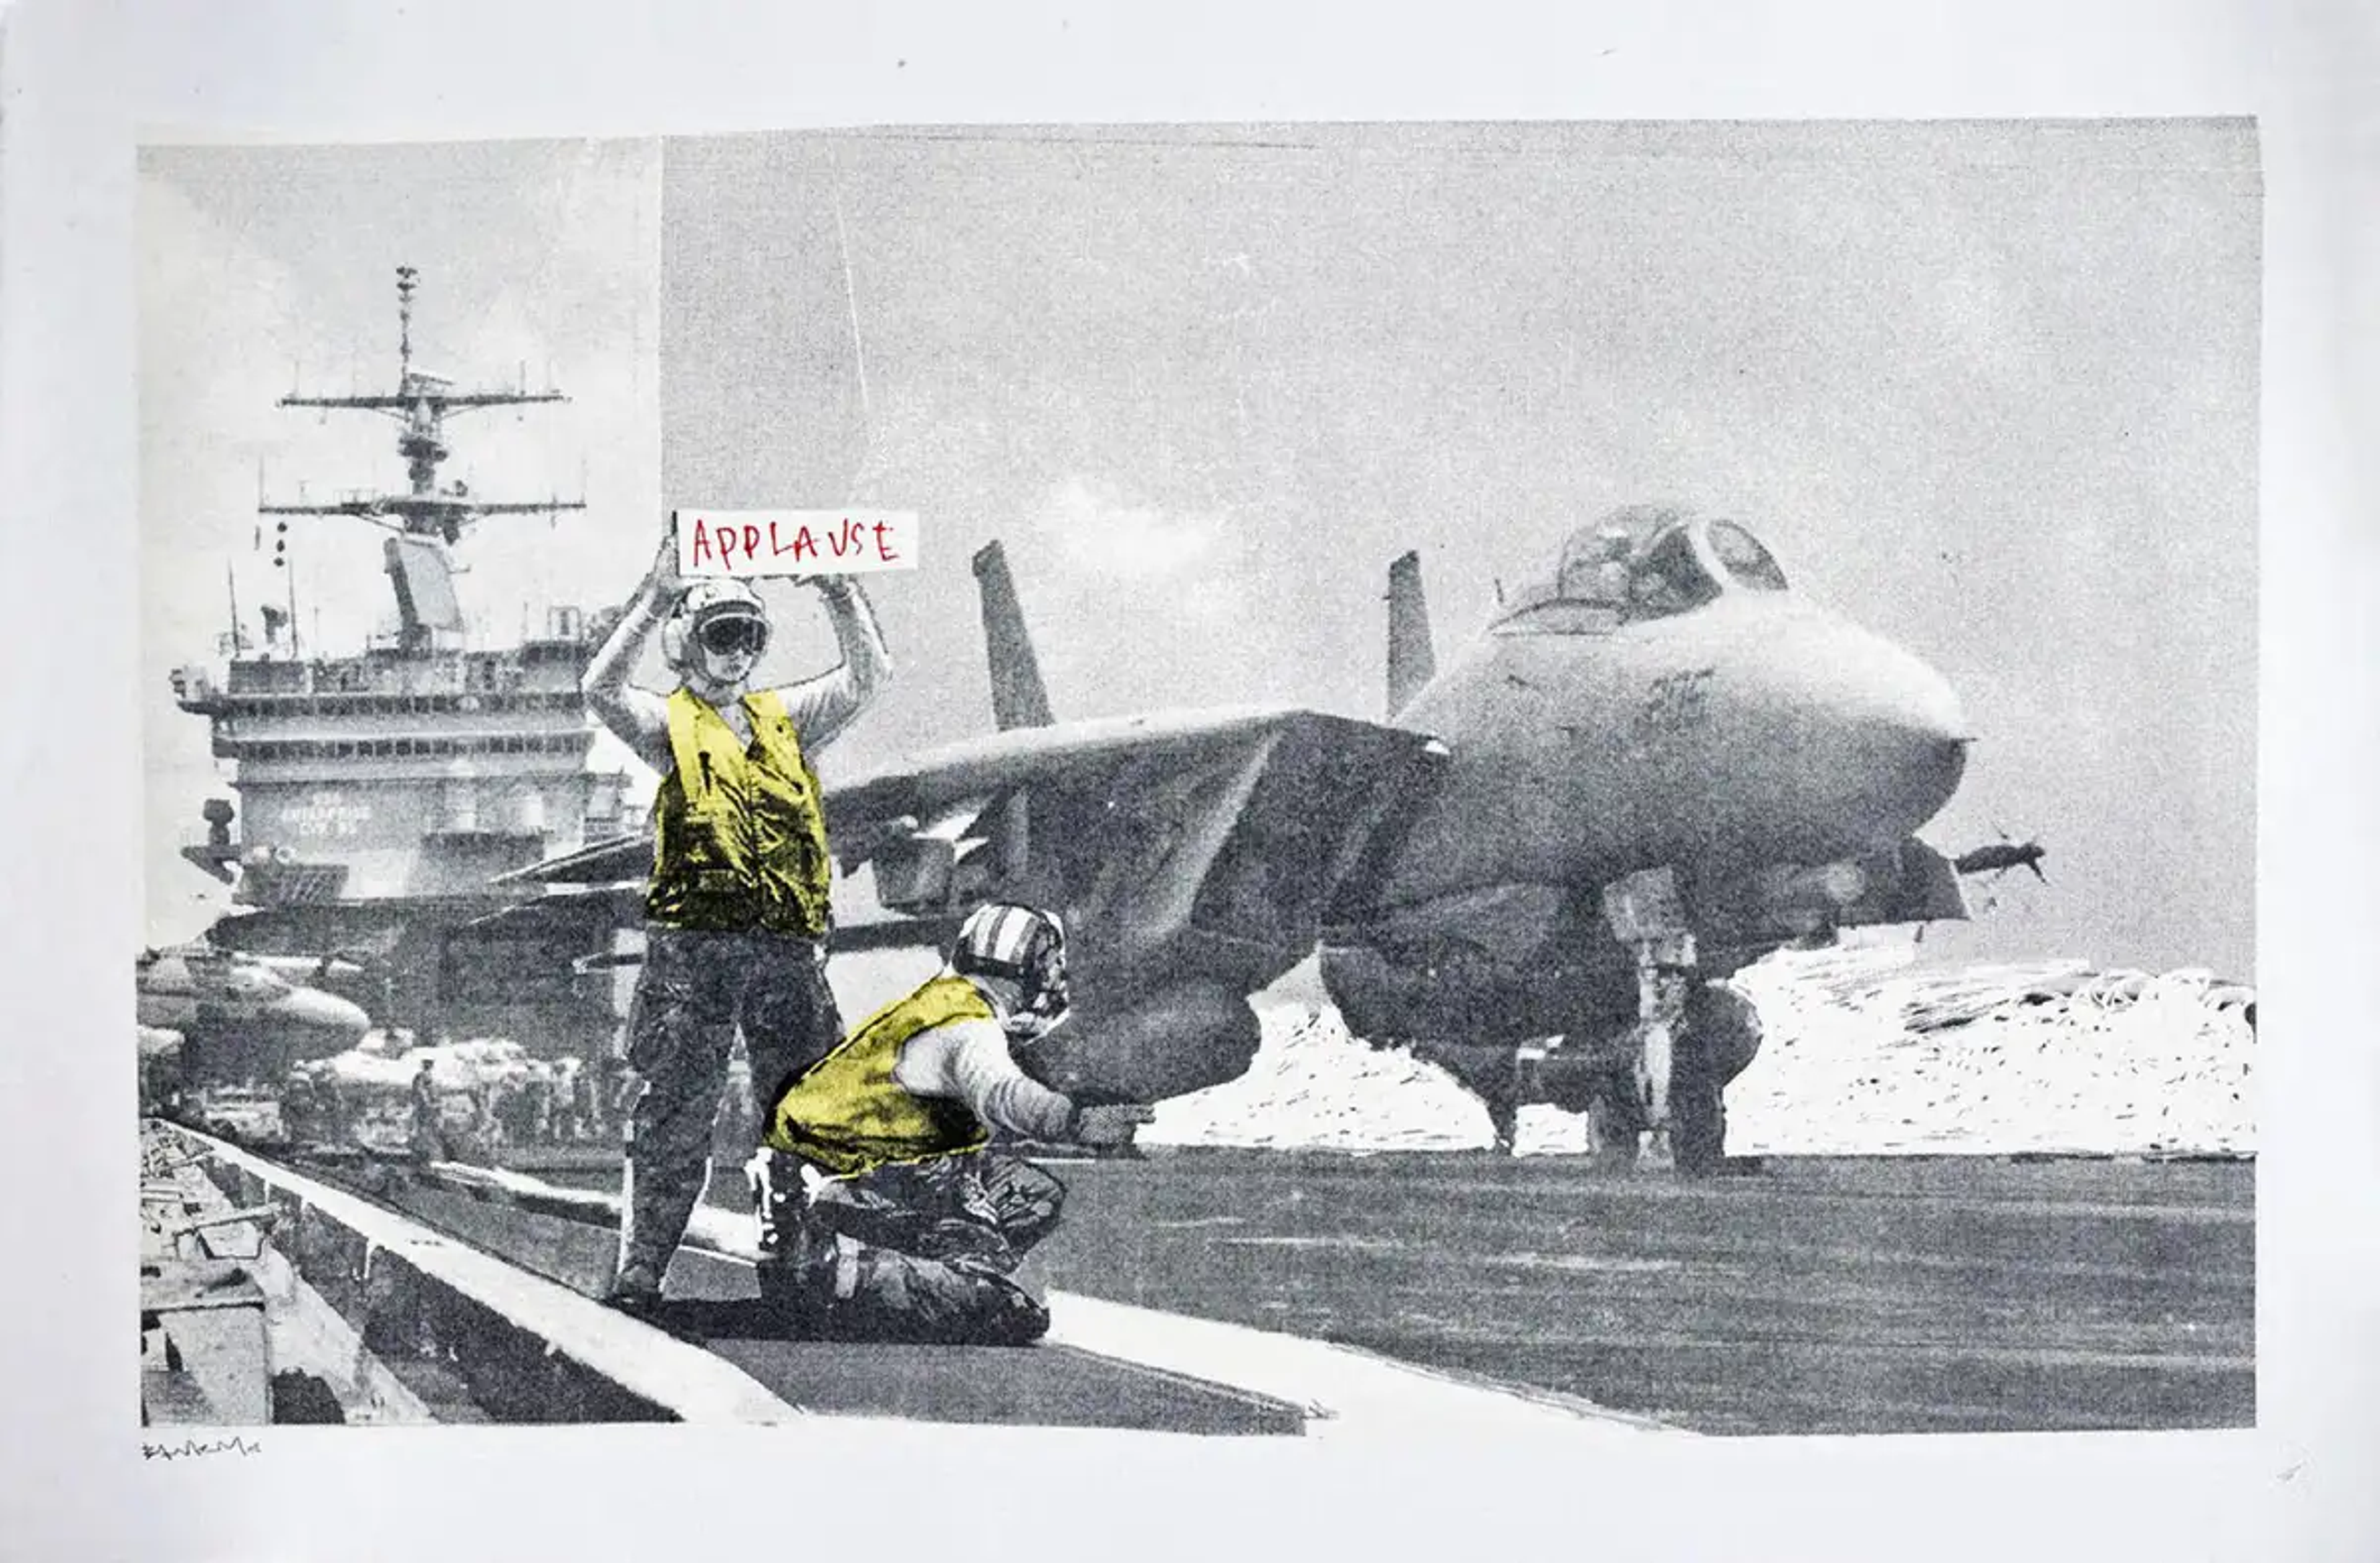 An image of a print by Banksy, depicting air traffic controllers directing a fighter jet, with an "Applause" sign held by one controller.